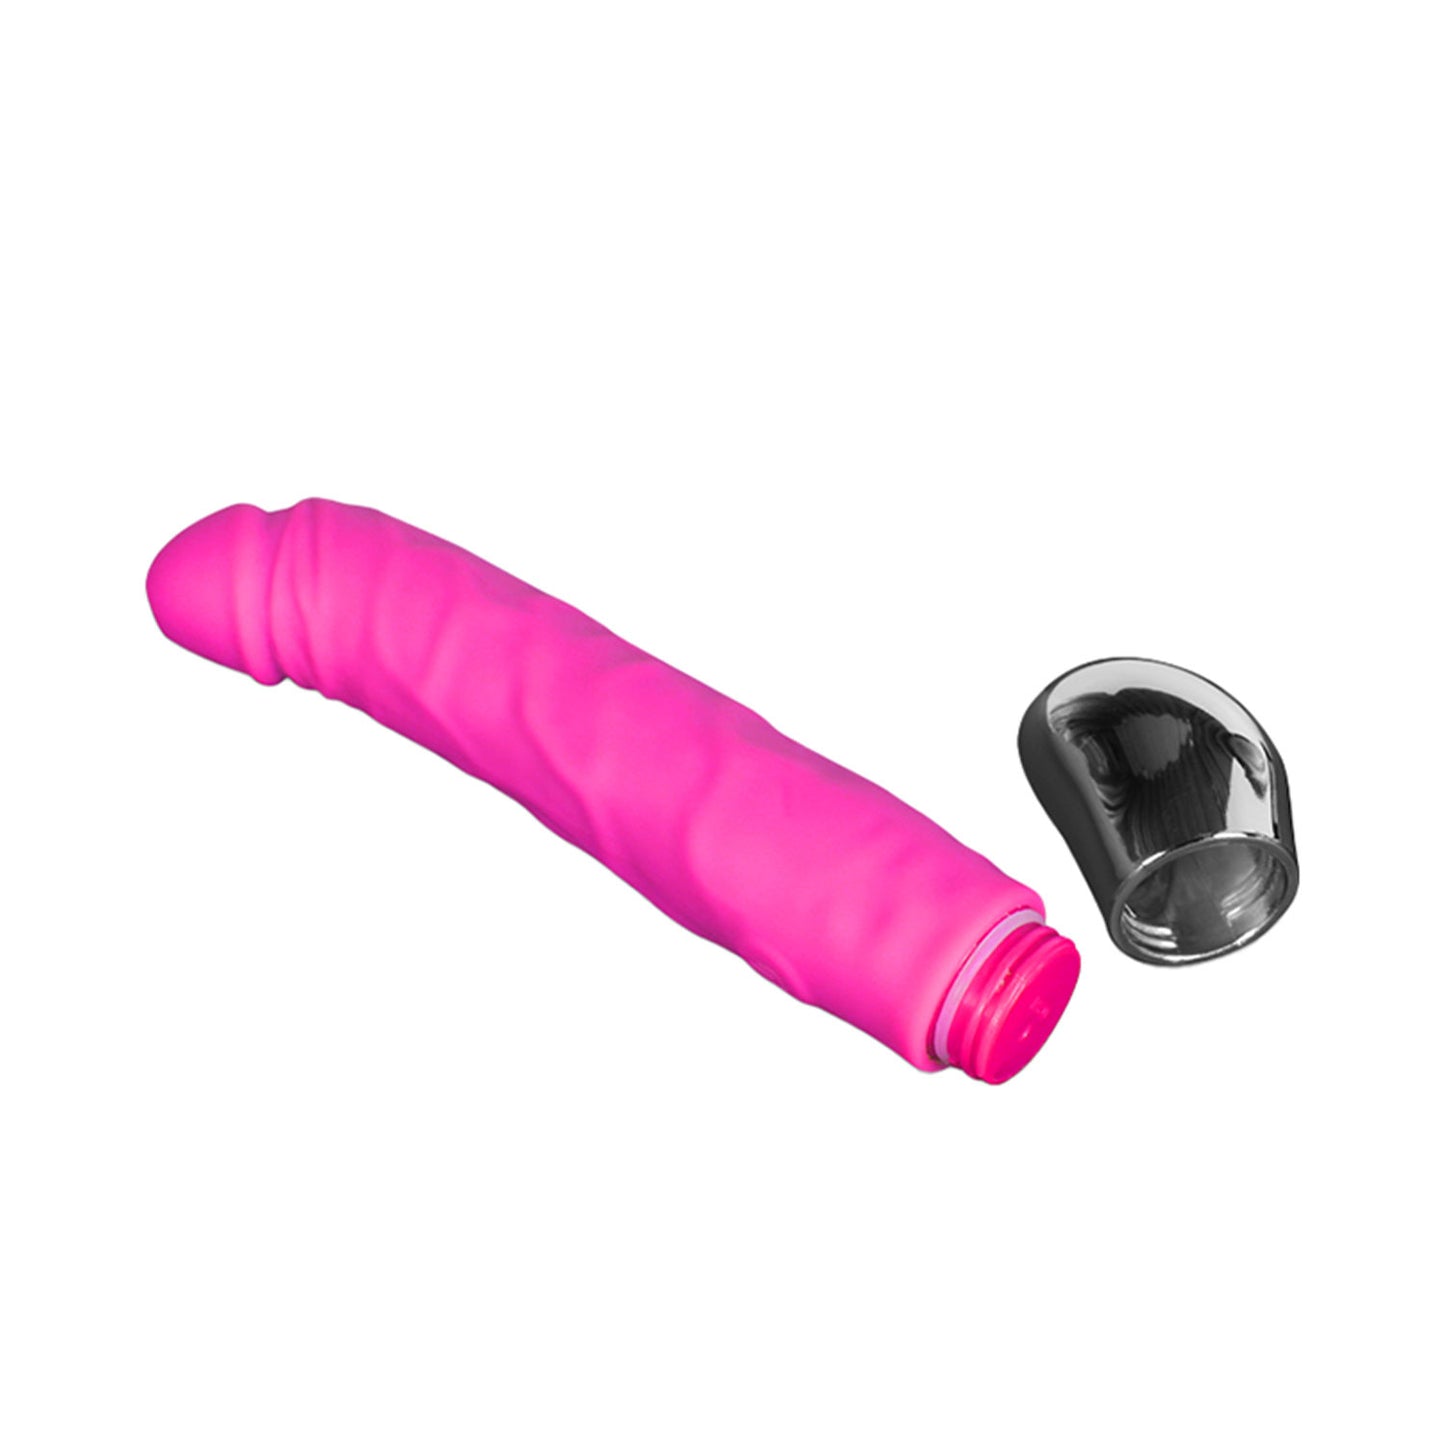 The Horny Company - Funky Fantasy Rechargeable 6.5" Cock Vibrating Strap-On Harness Dildo